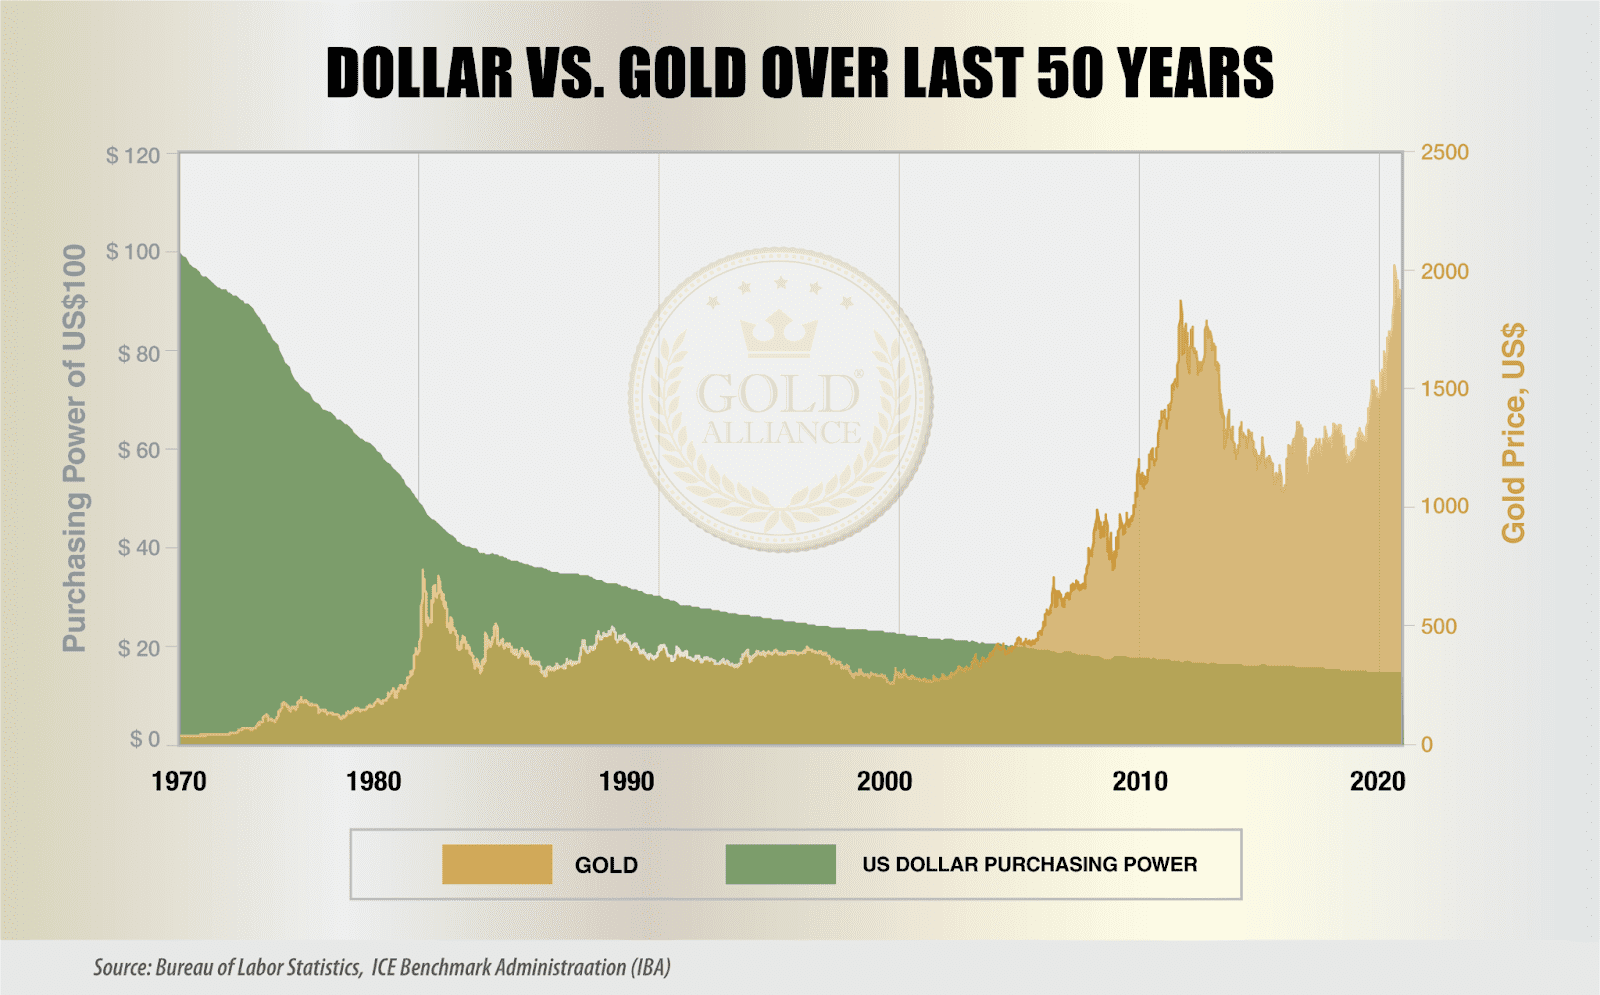 After we exchanged the gold standard for the fiat system, the purchasing power of the US dollar fell while the purchasing power of gold rose.